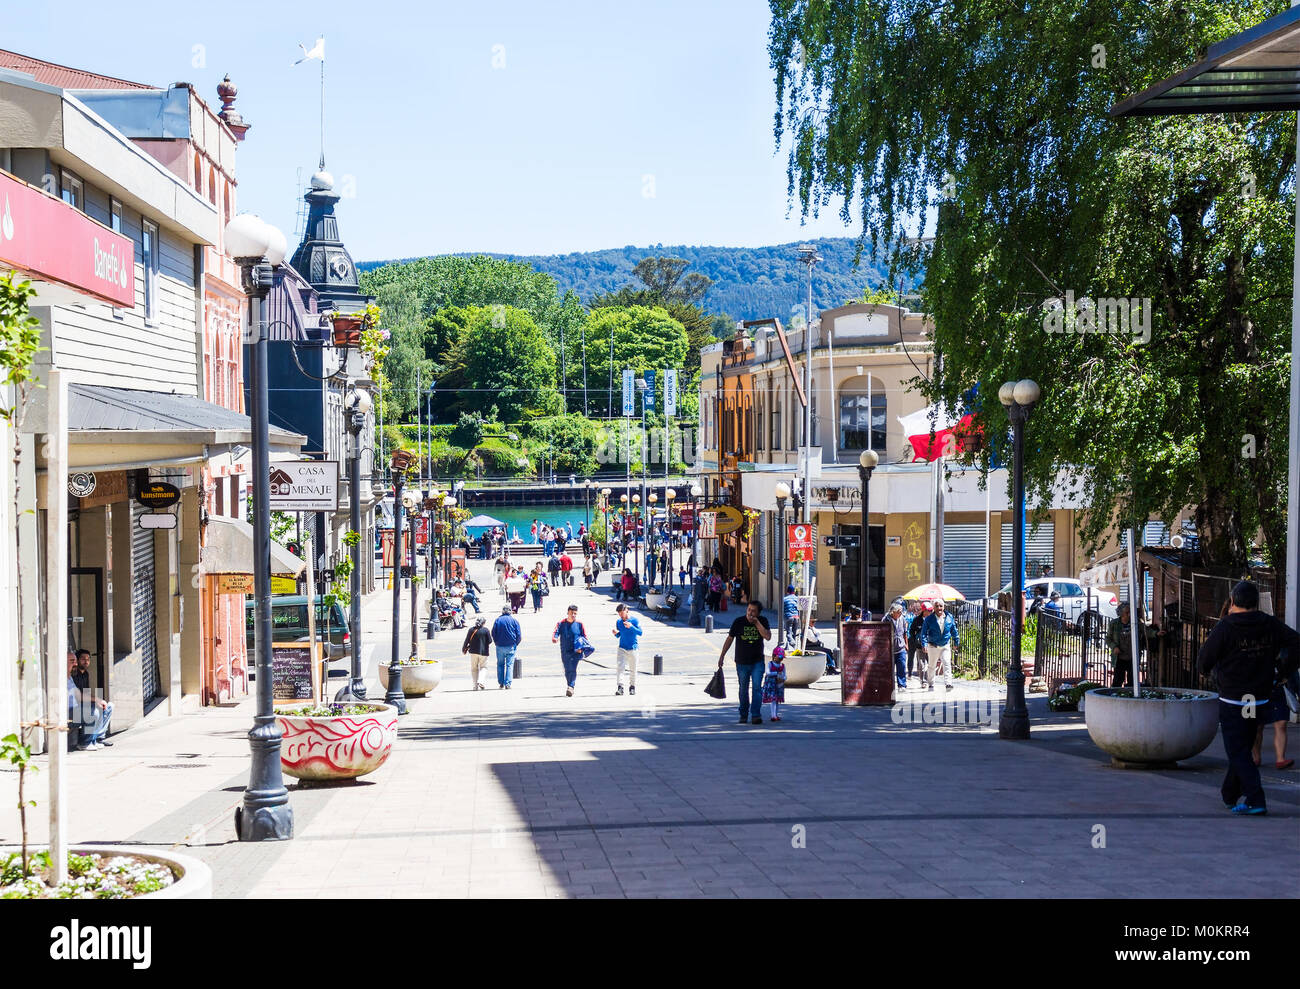 VALDIVIA, CHILE - OCTOBER 30, 2016: People walking down the pedestrian street Libertal in the center of Valdivia. This is the most beautiful and old p Stock Photo